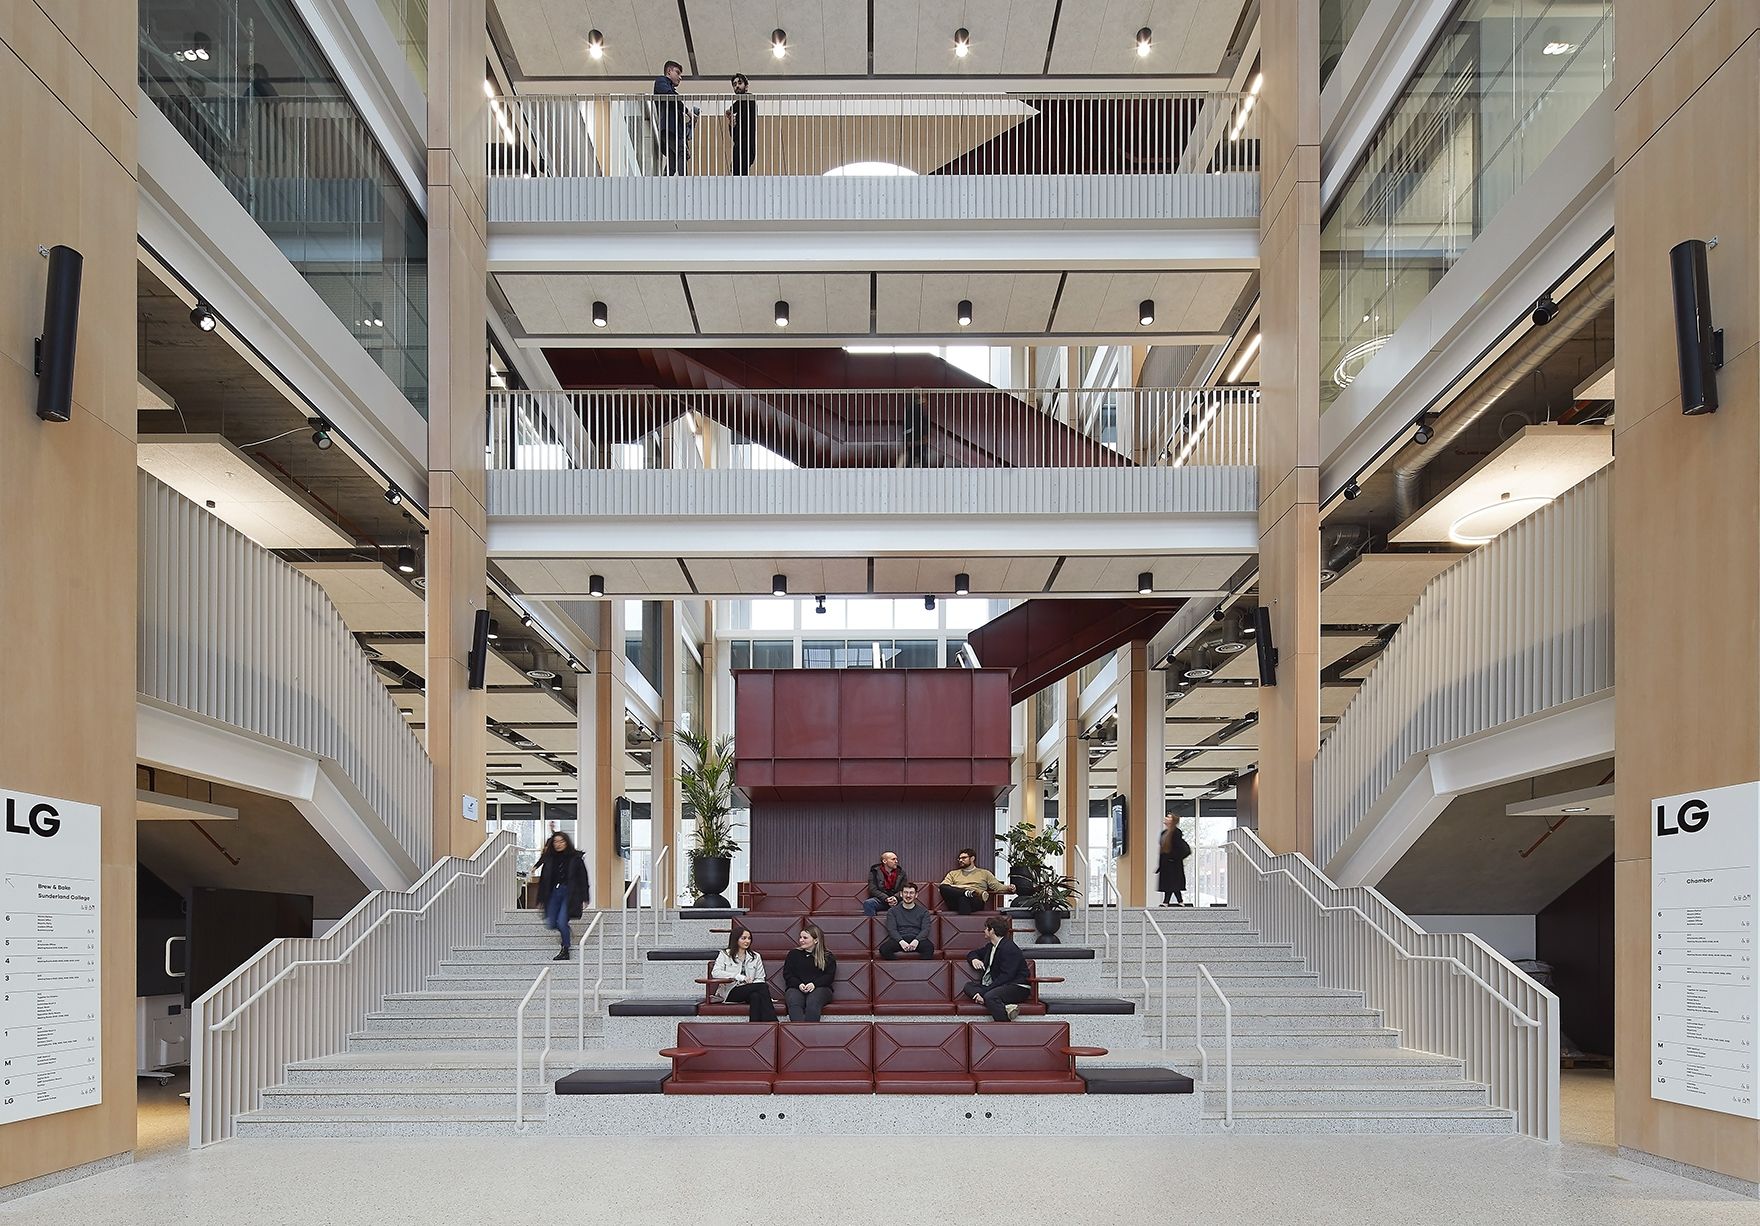 City Hall Faulknerbrowns Architects Sunderland Bco Awards Best Corporate Workplace Lh